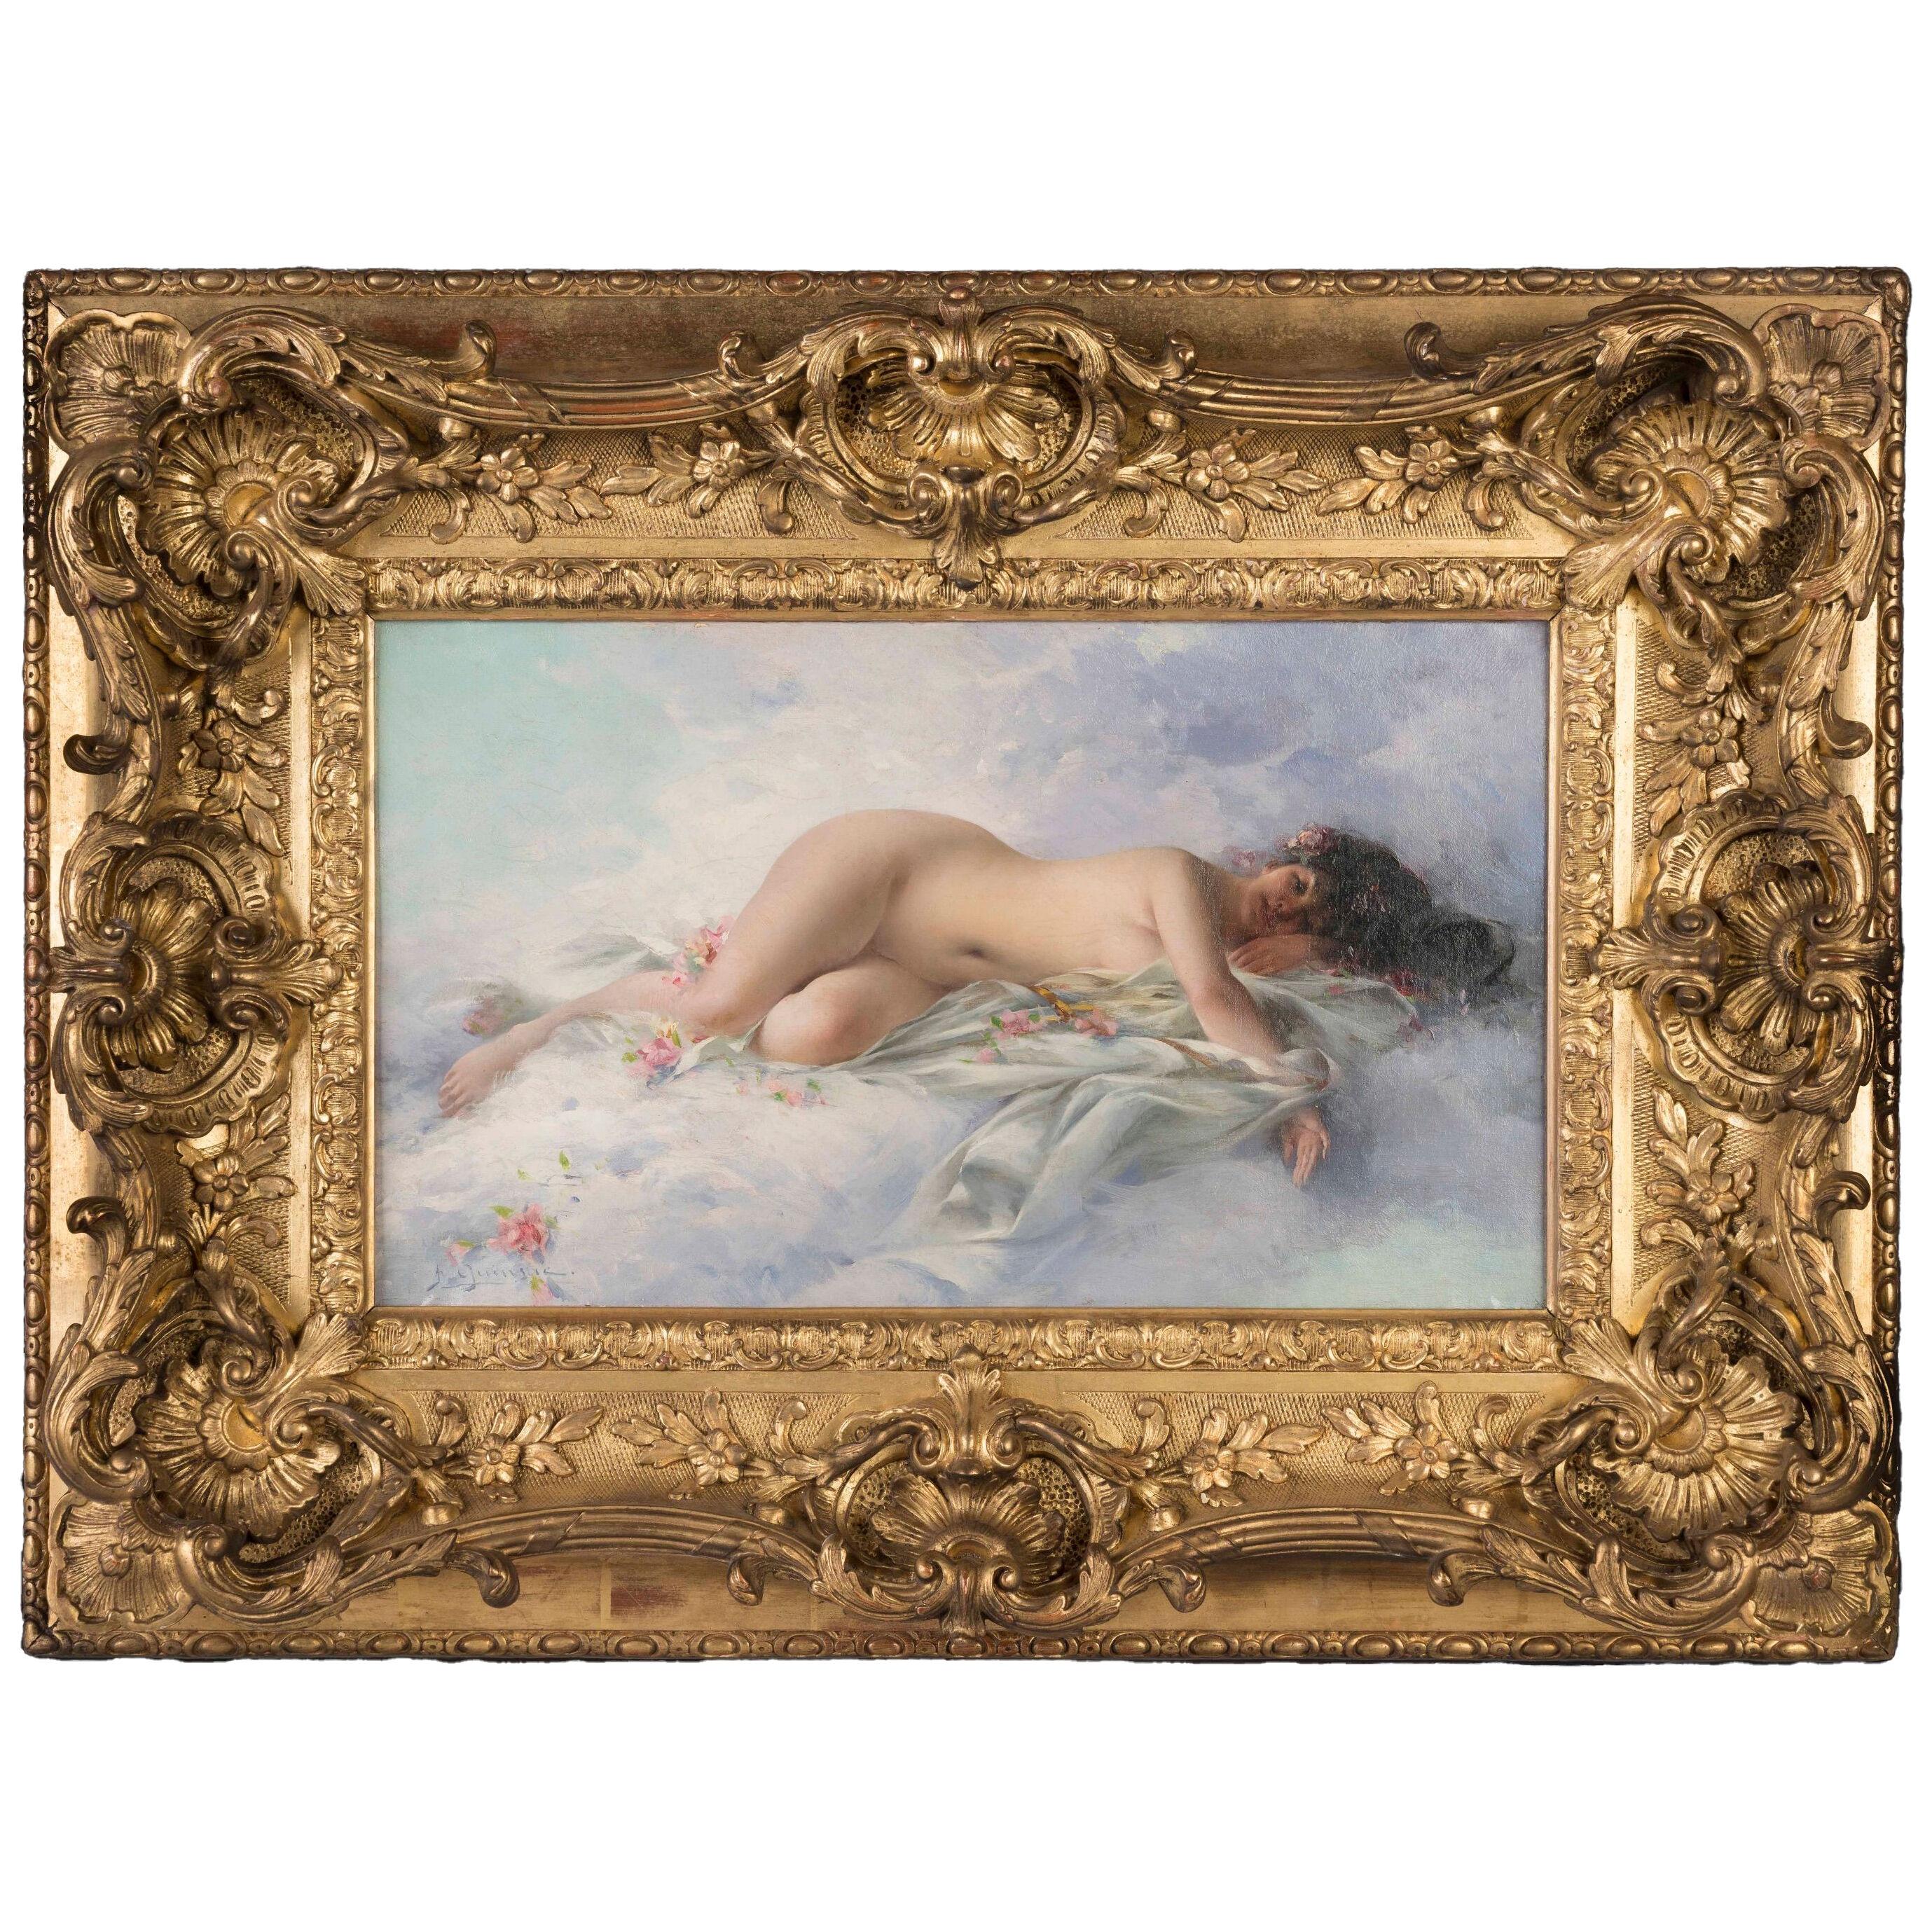 Oil on Canvas Painting of a Reclining Nude in Gilded Frame